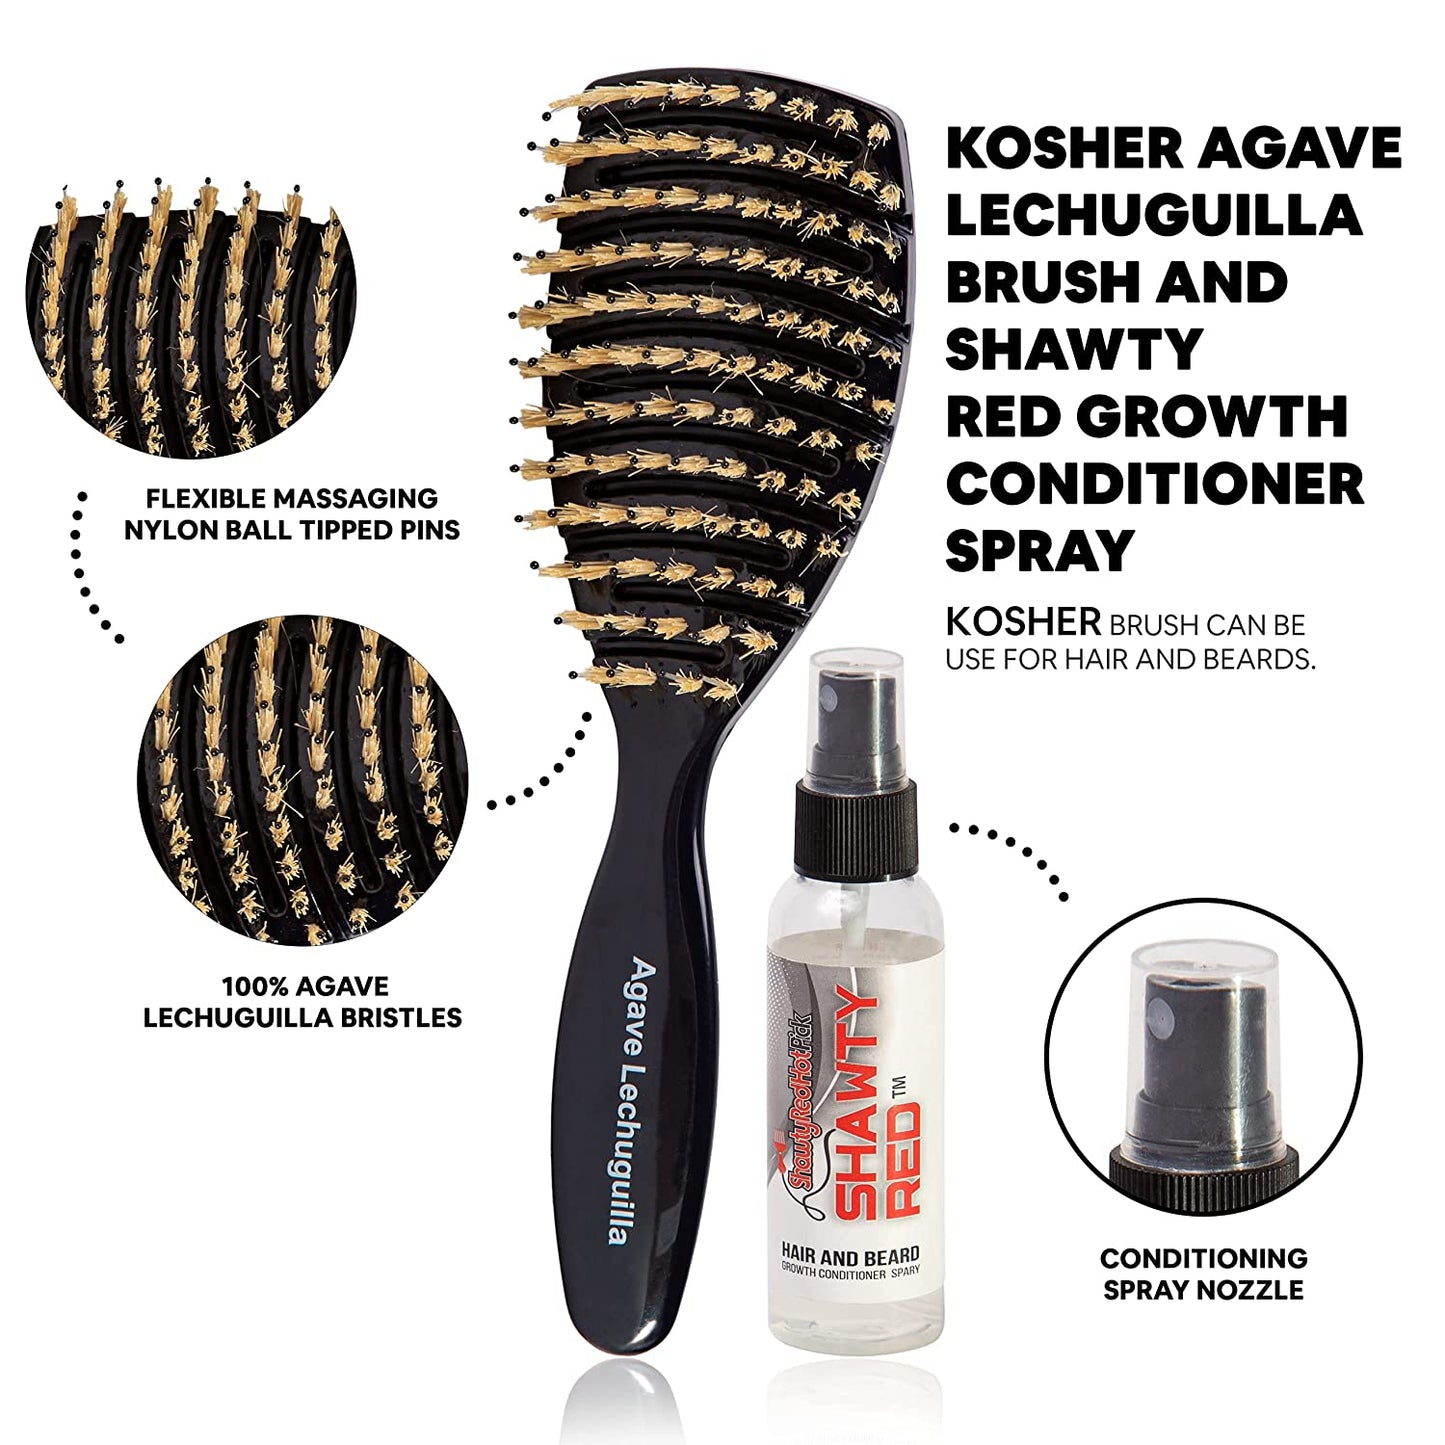 The KoSher Agave Lechuguilla Hairbrush w/ Hair Conditioning Spray